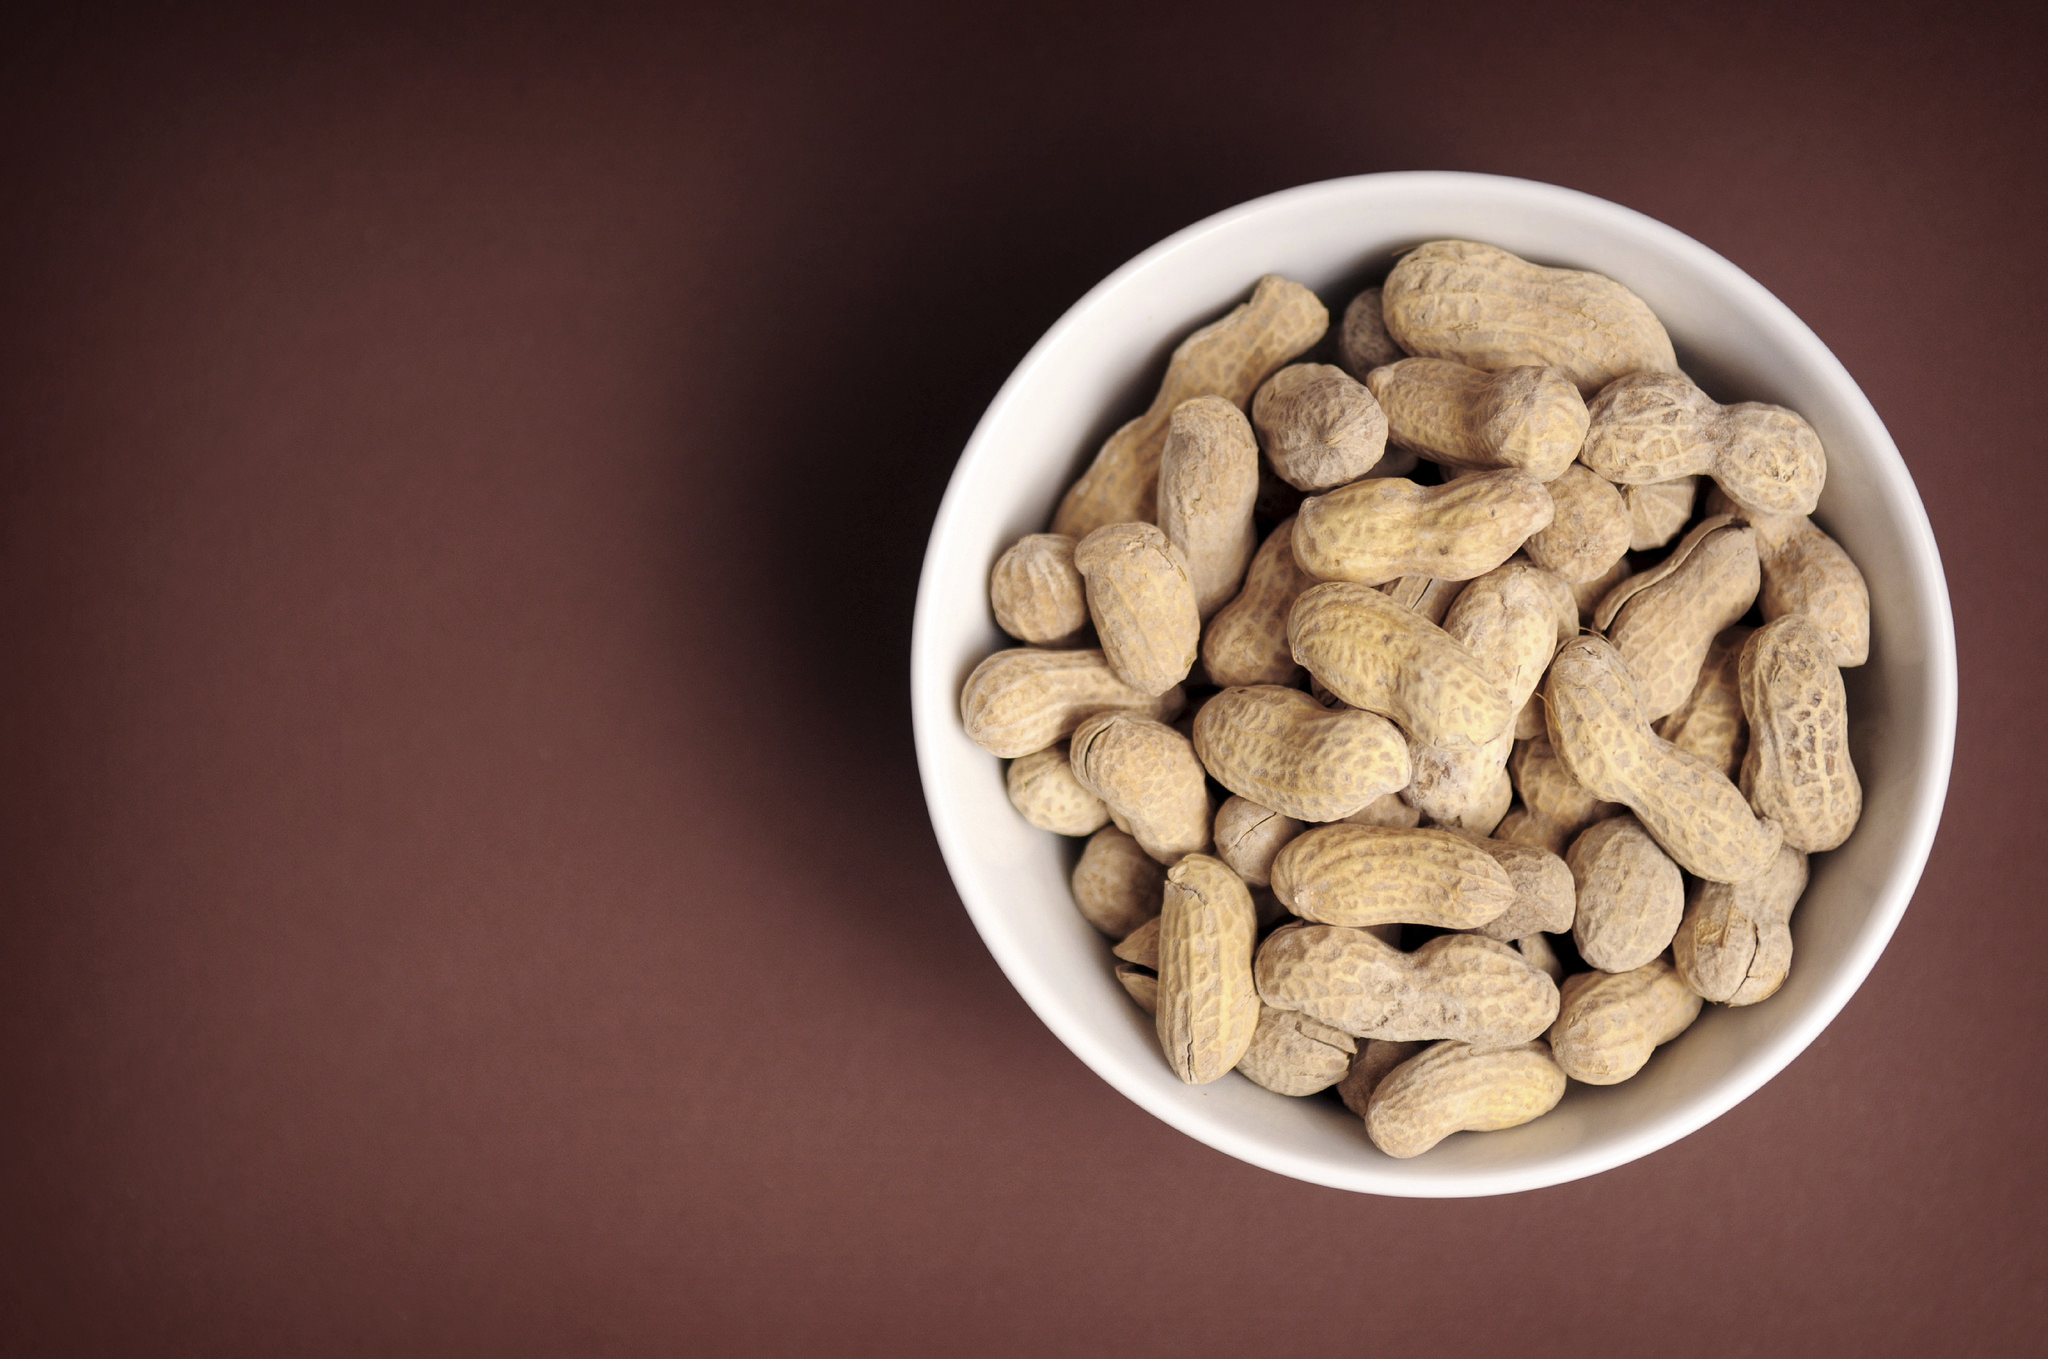 Peanut CEO Gets Harshest Food Safety Penalty Ever